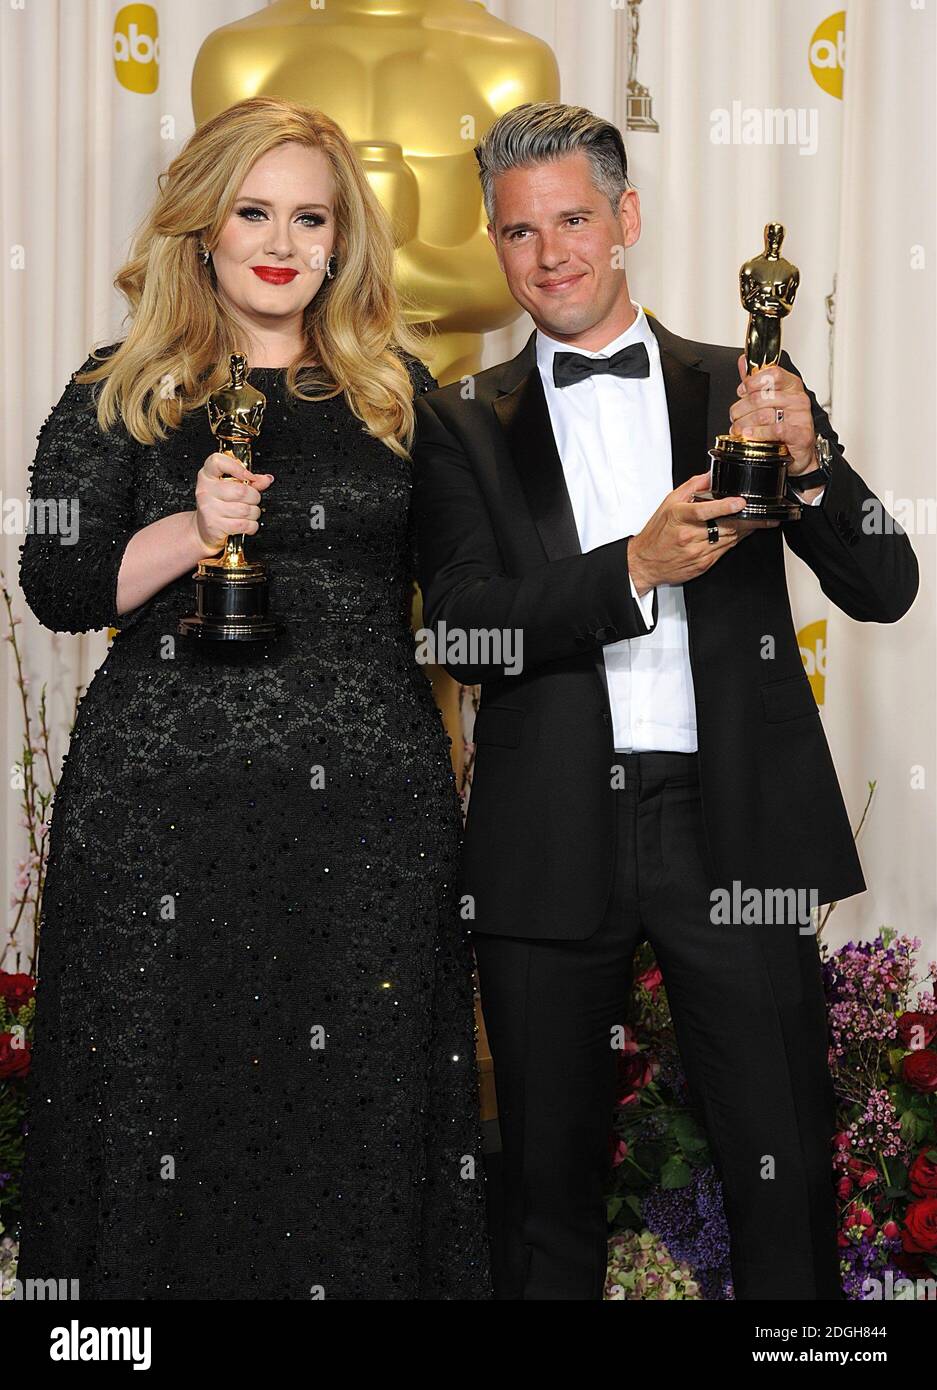 Adele and Paul Epworth with the Oscar for Achievement in Music (Original Song) for Skyfall at the 85th Academy Awards at the Dolby Theatre, Los Angeles. Stock Photo